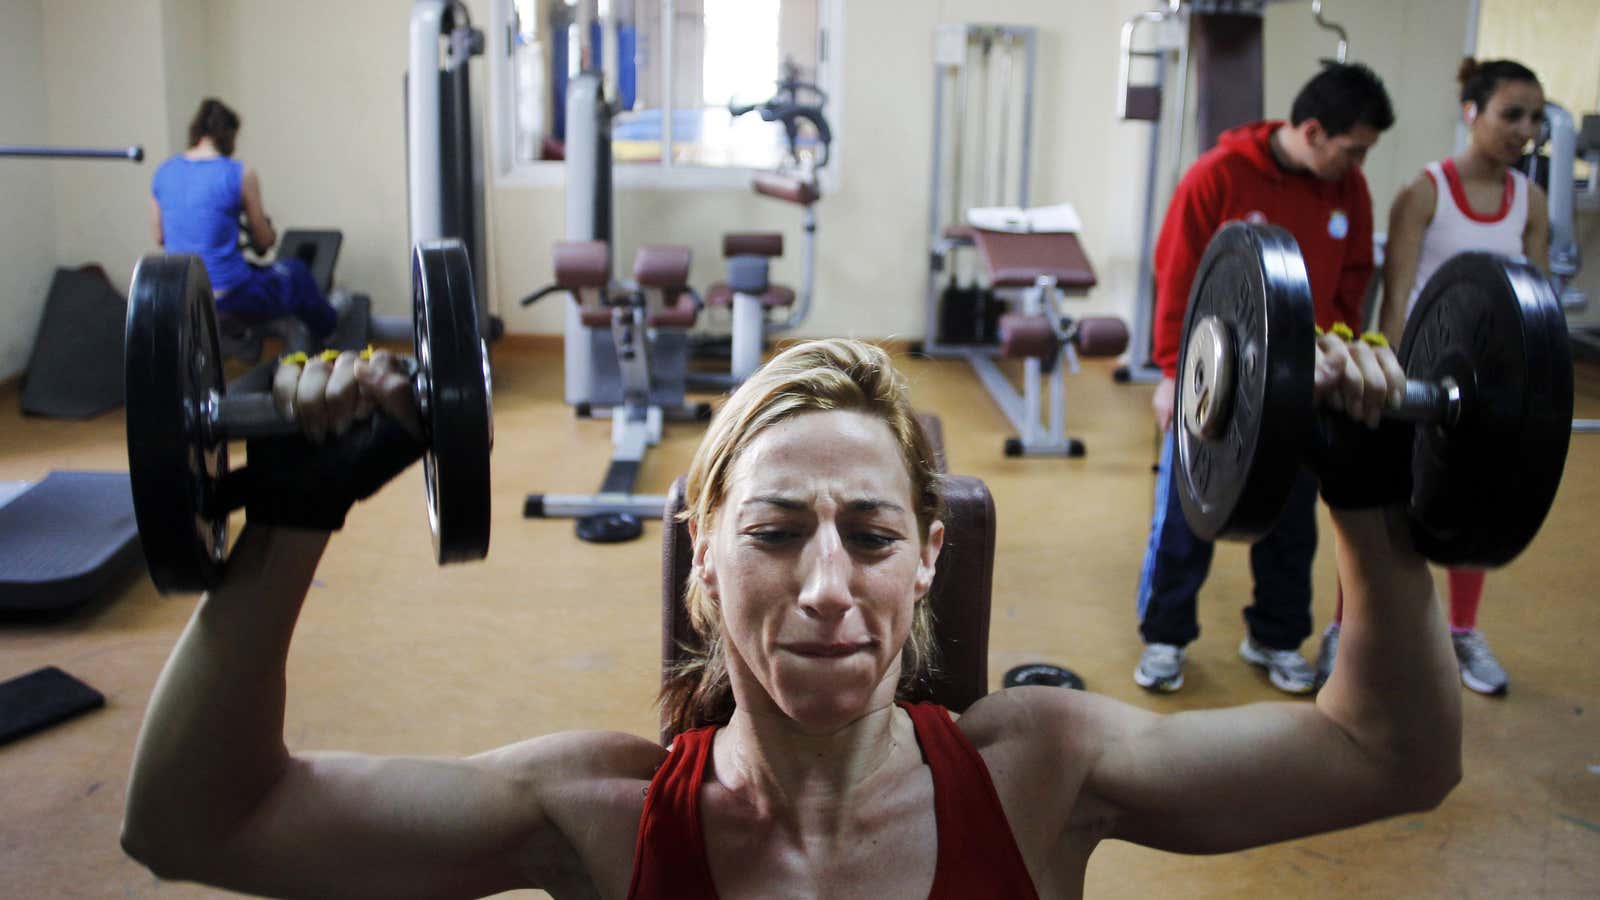 A new service will go through your insane gym-membership canceling rigmarole for you—for free